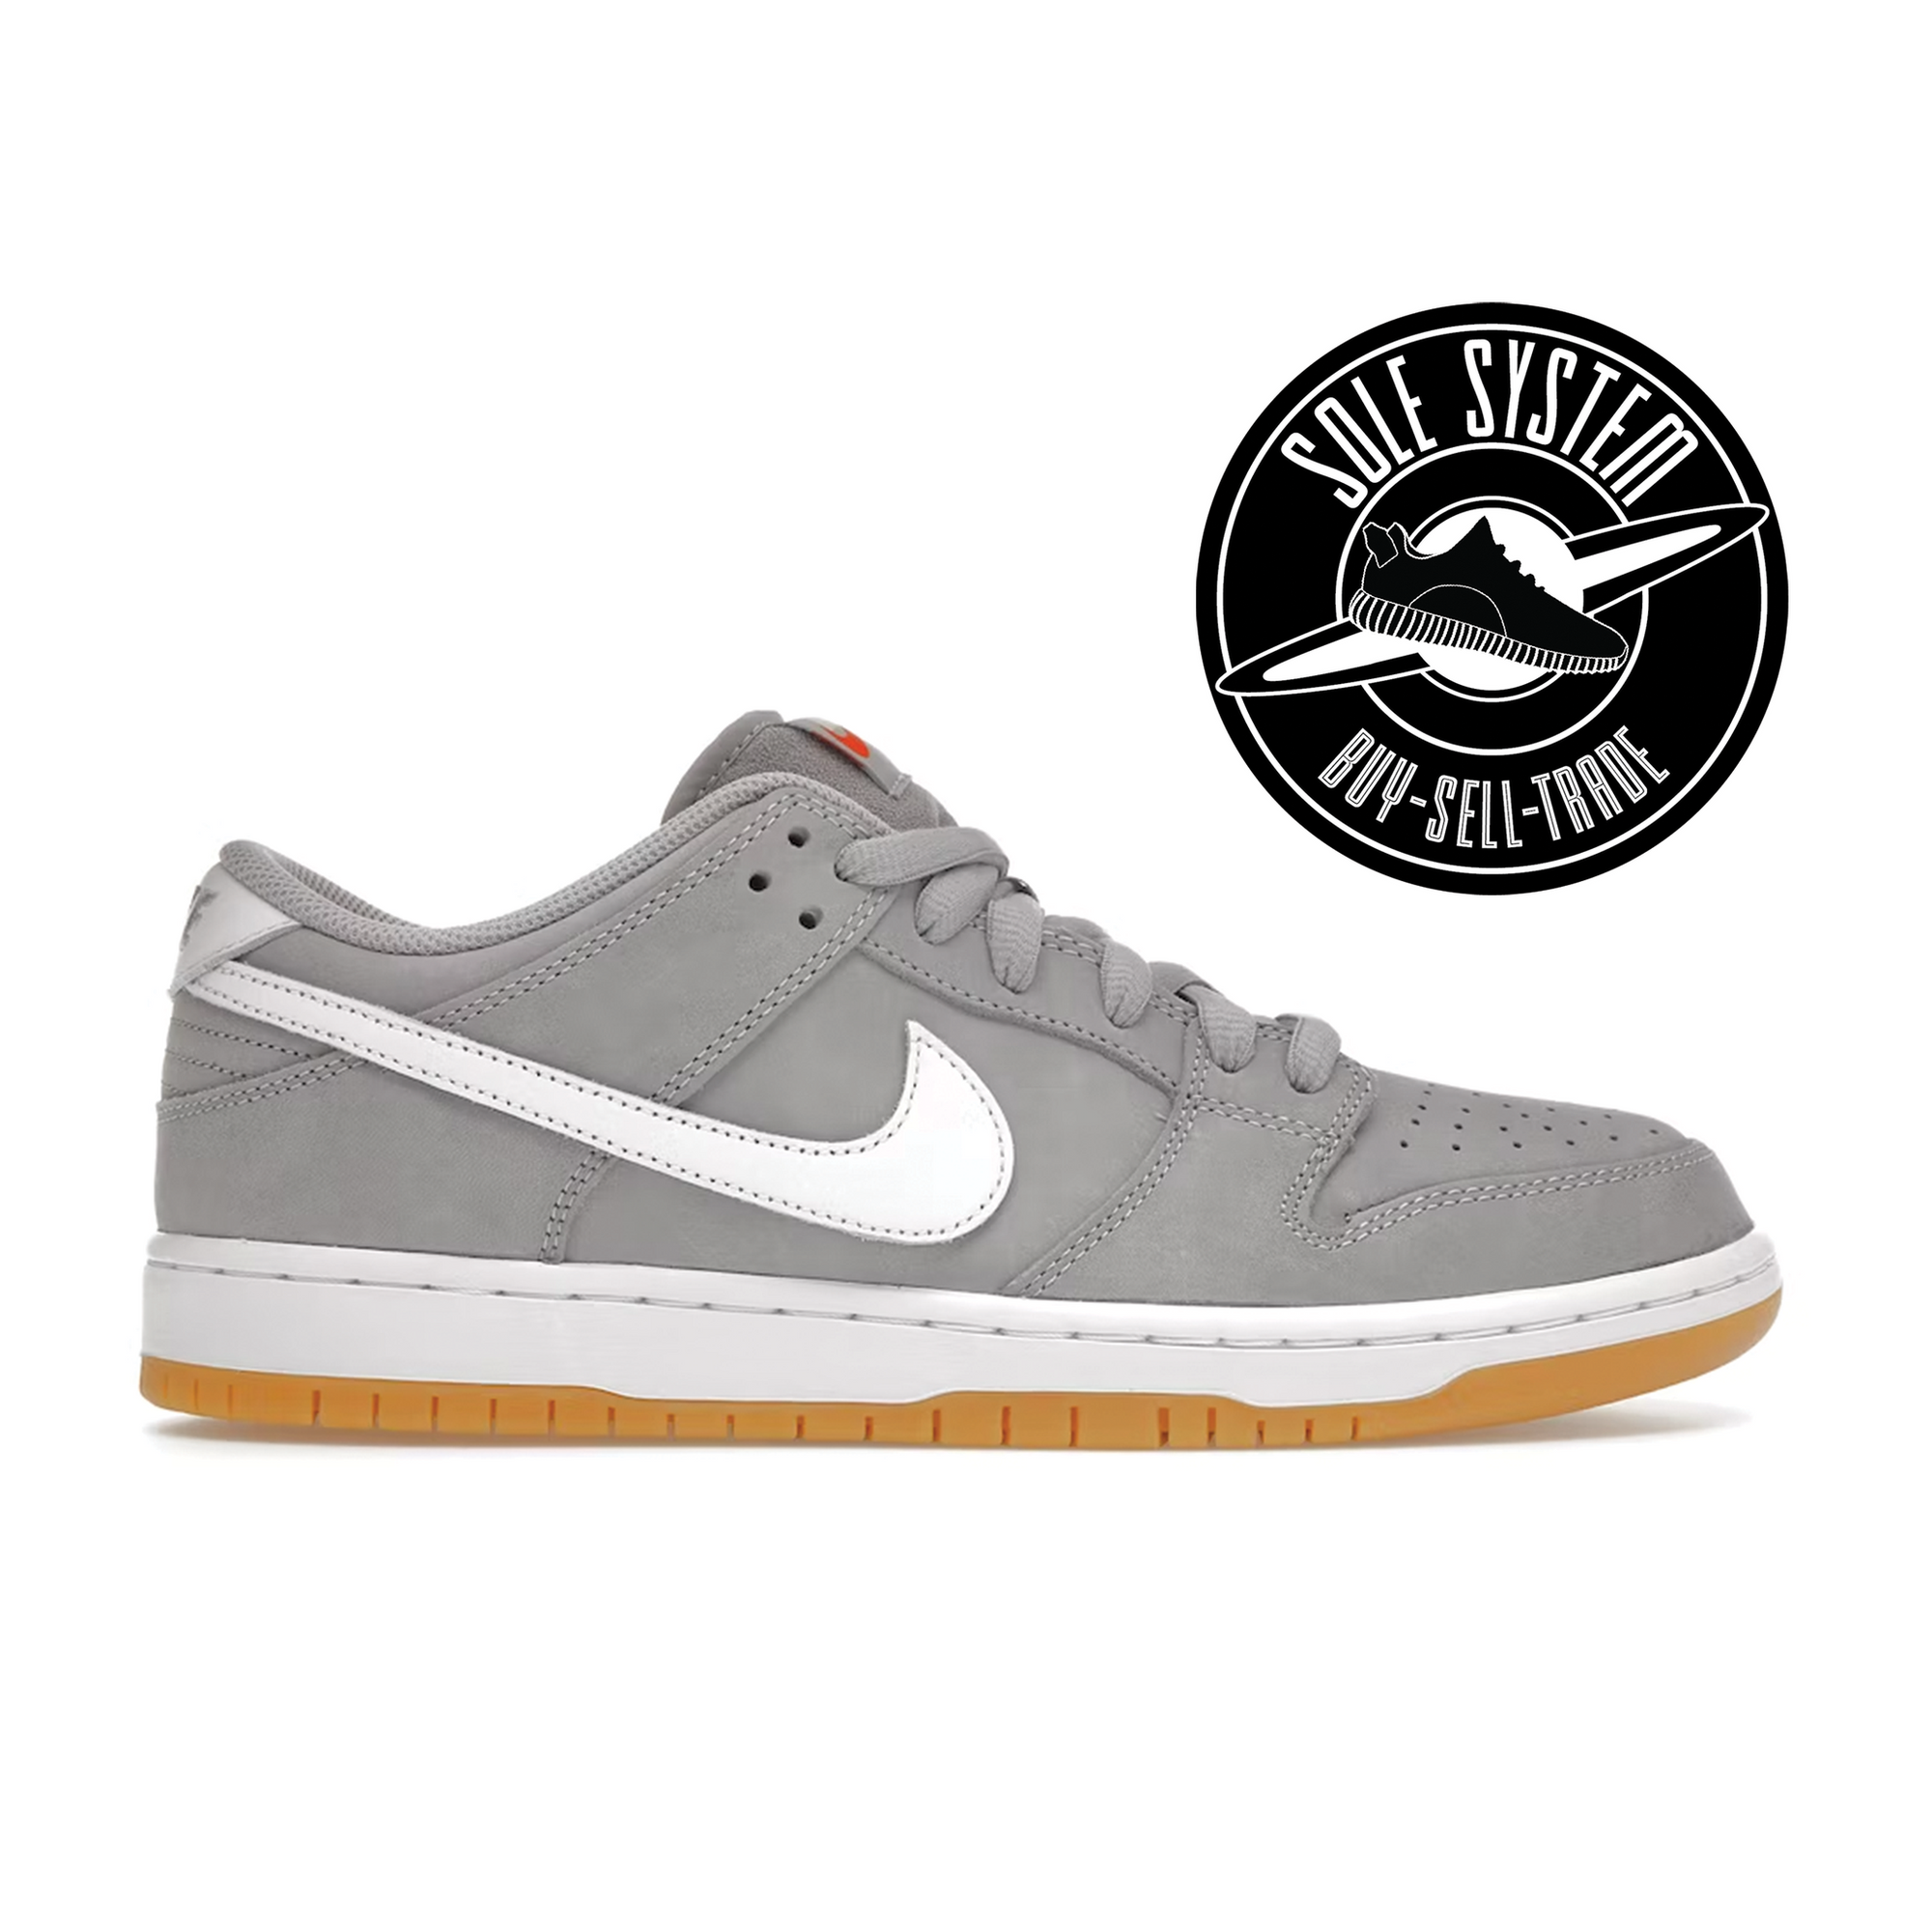 Nike SB Dunk Low Pro - Black/Cool Grey/ Black. Update: SOLD OUT